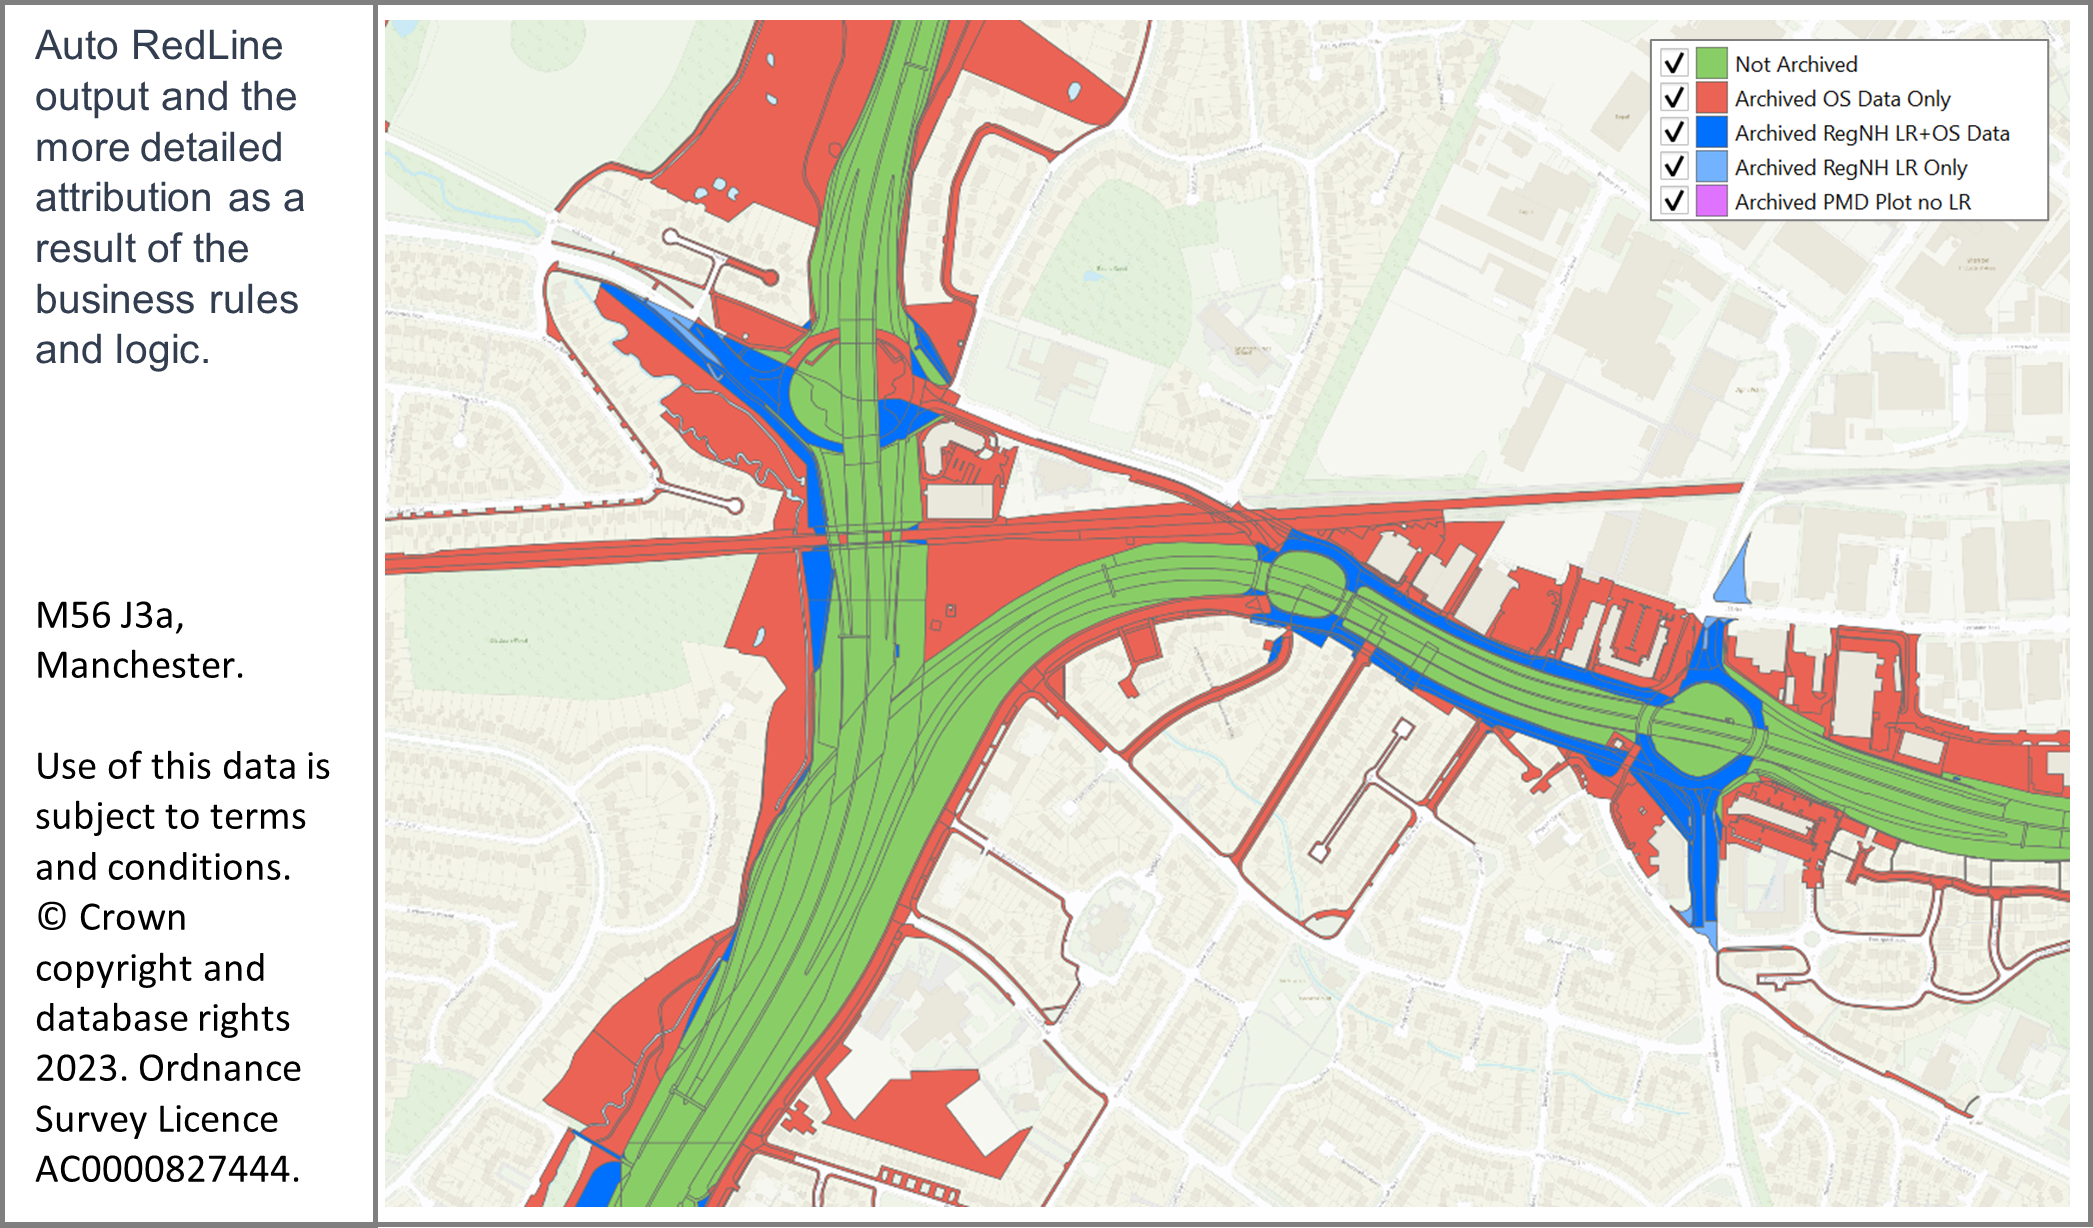 More detailed roads and highways data, shown in red, blue, and green for the M56, Manchester